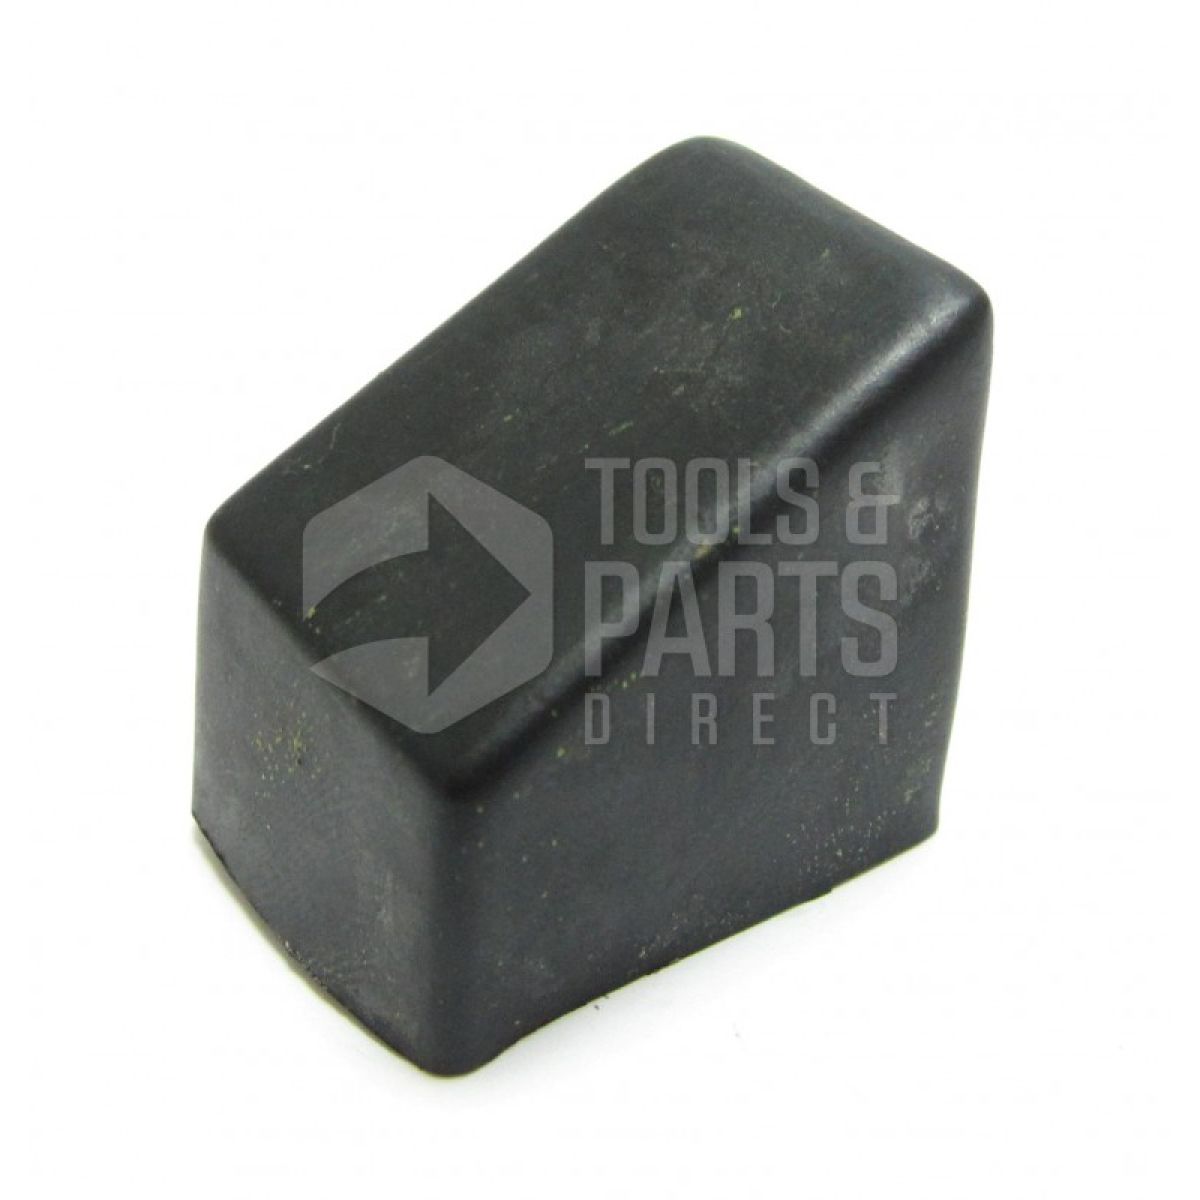 https://toolsandpartsdirect.co.uk/image-factory/739df36146a17d0c46a138ddc17f23bffa664036~1200x1200/images/products/7sNWKfseJBs7BW3XlQykrix539KG7mE0s1KwG08B.jpg